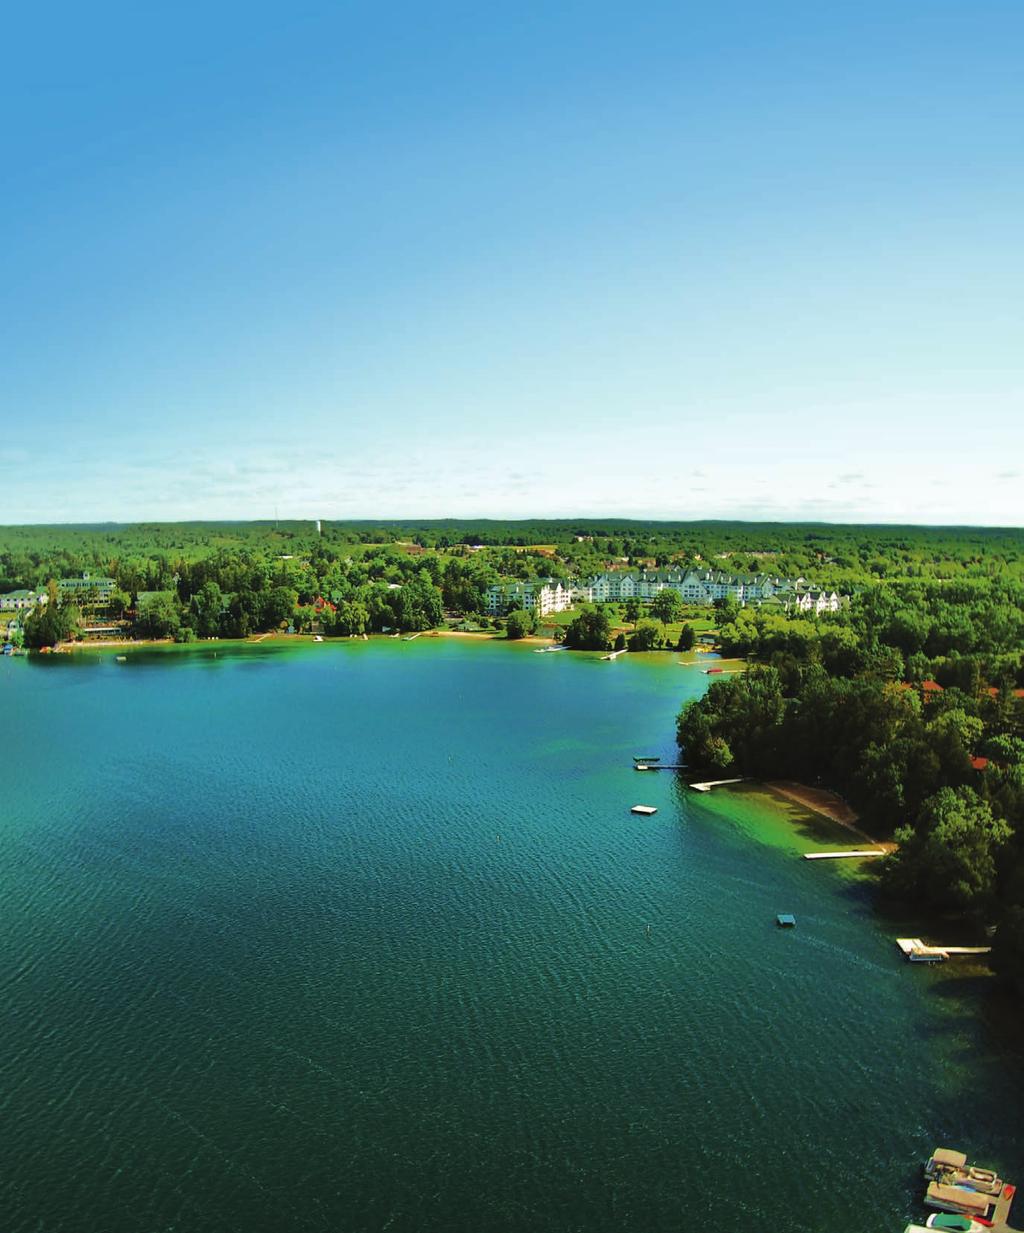 ELKHART LAKE destination VILLAGE OF ELKHART LAKE From fast cars to slow afternoons, Wisconsin s legendary getaway is great for building teams. BY LAURIE DOVE PHOTO COURTESY OF: THE OSTHOFF RESORT.